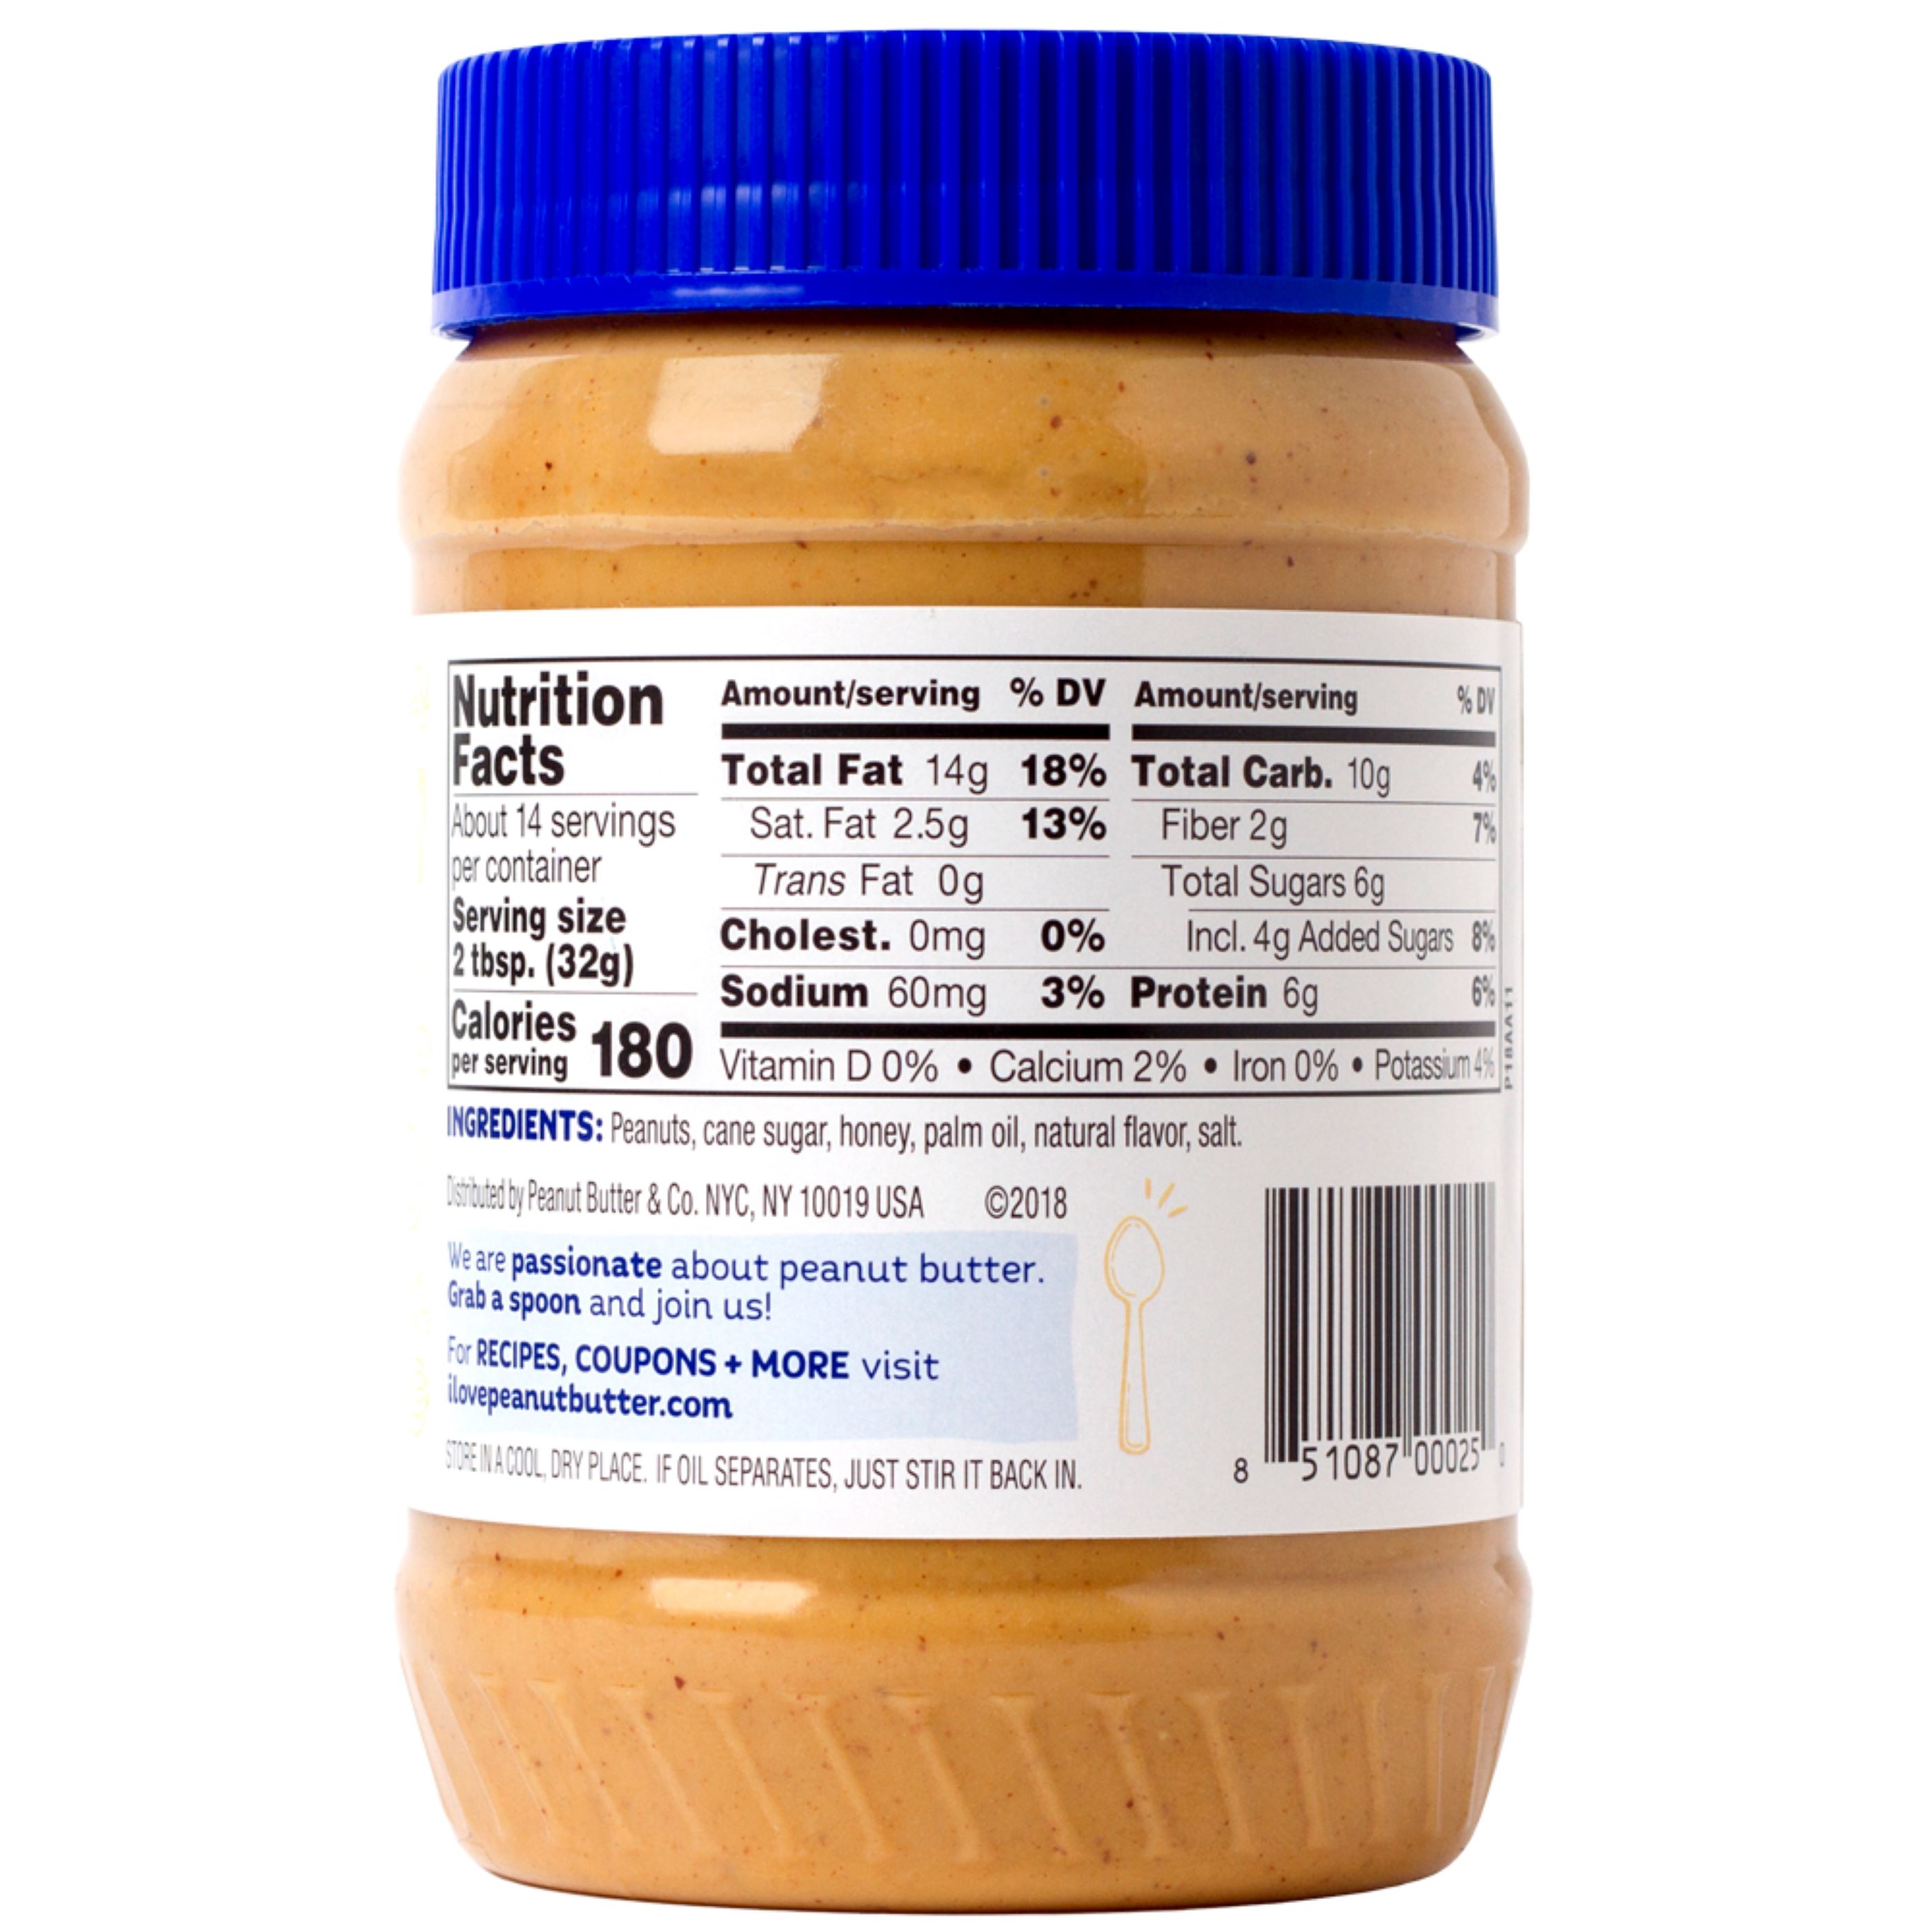 Peanut Butter & Co, The Bee's Knees, Peanut Butter Spread, 16 oz - image 2 of 6